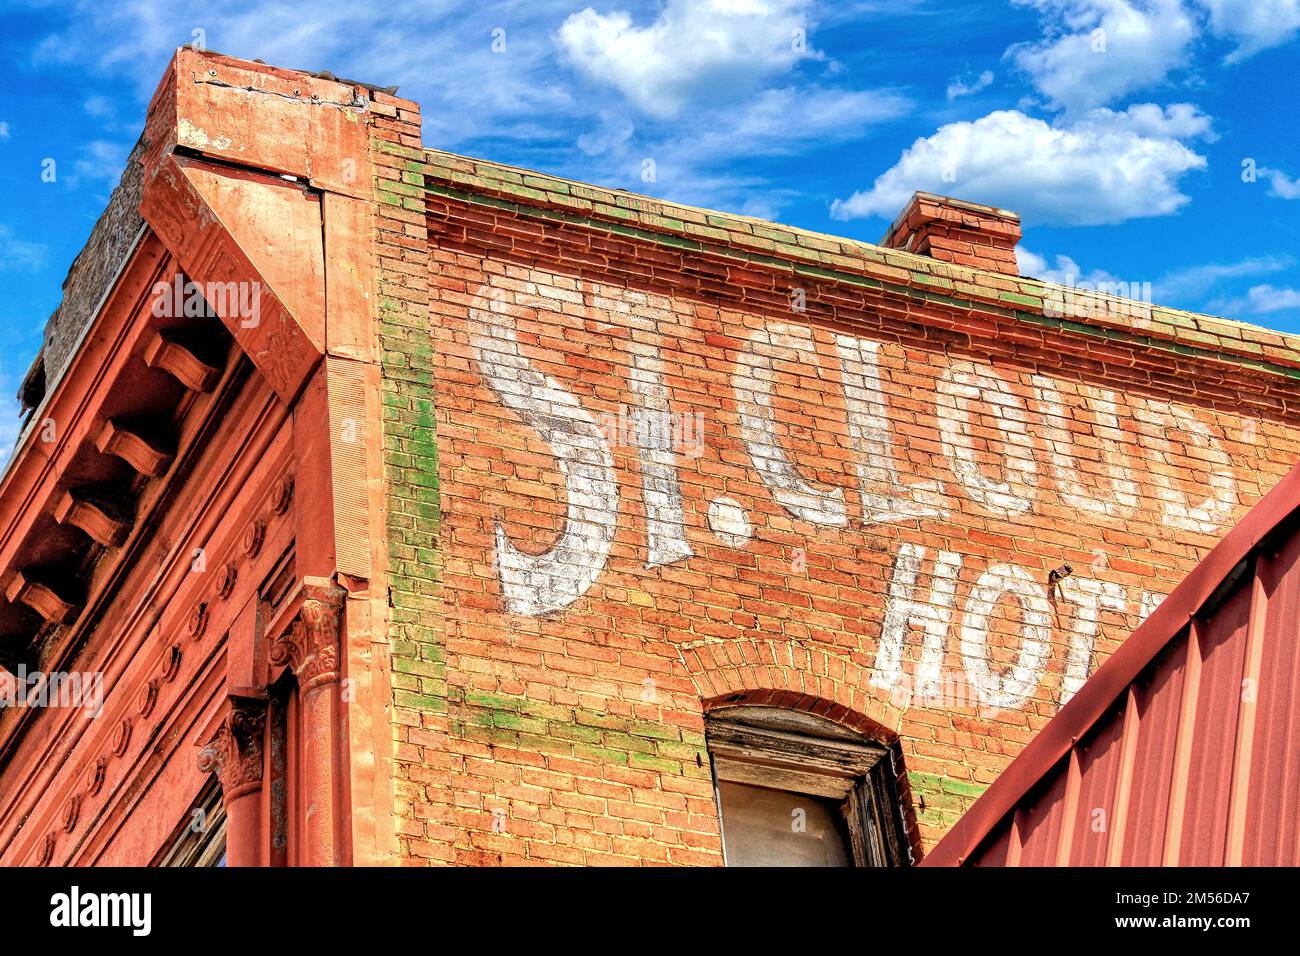 Showing detail of the famous and historic St Cloud Hotel brick building on Manvel Avenue in downtown Chandler Oklahoma on Route 66. Stock Photo